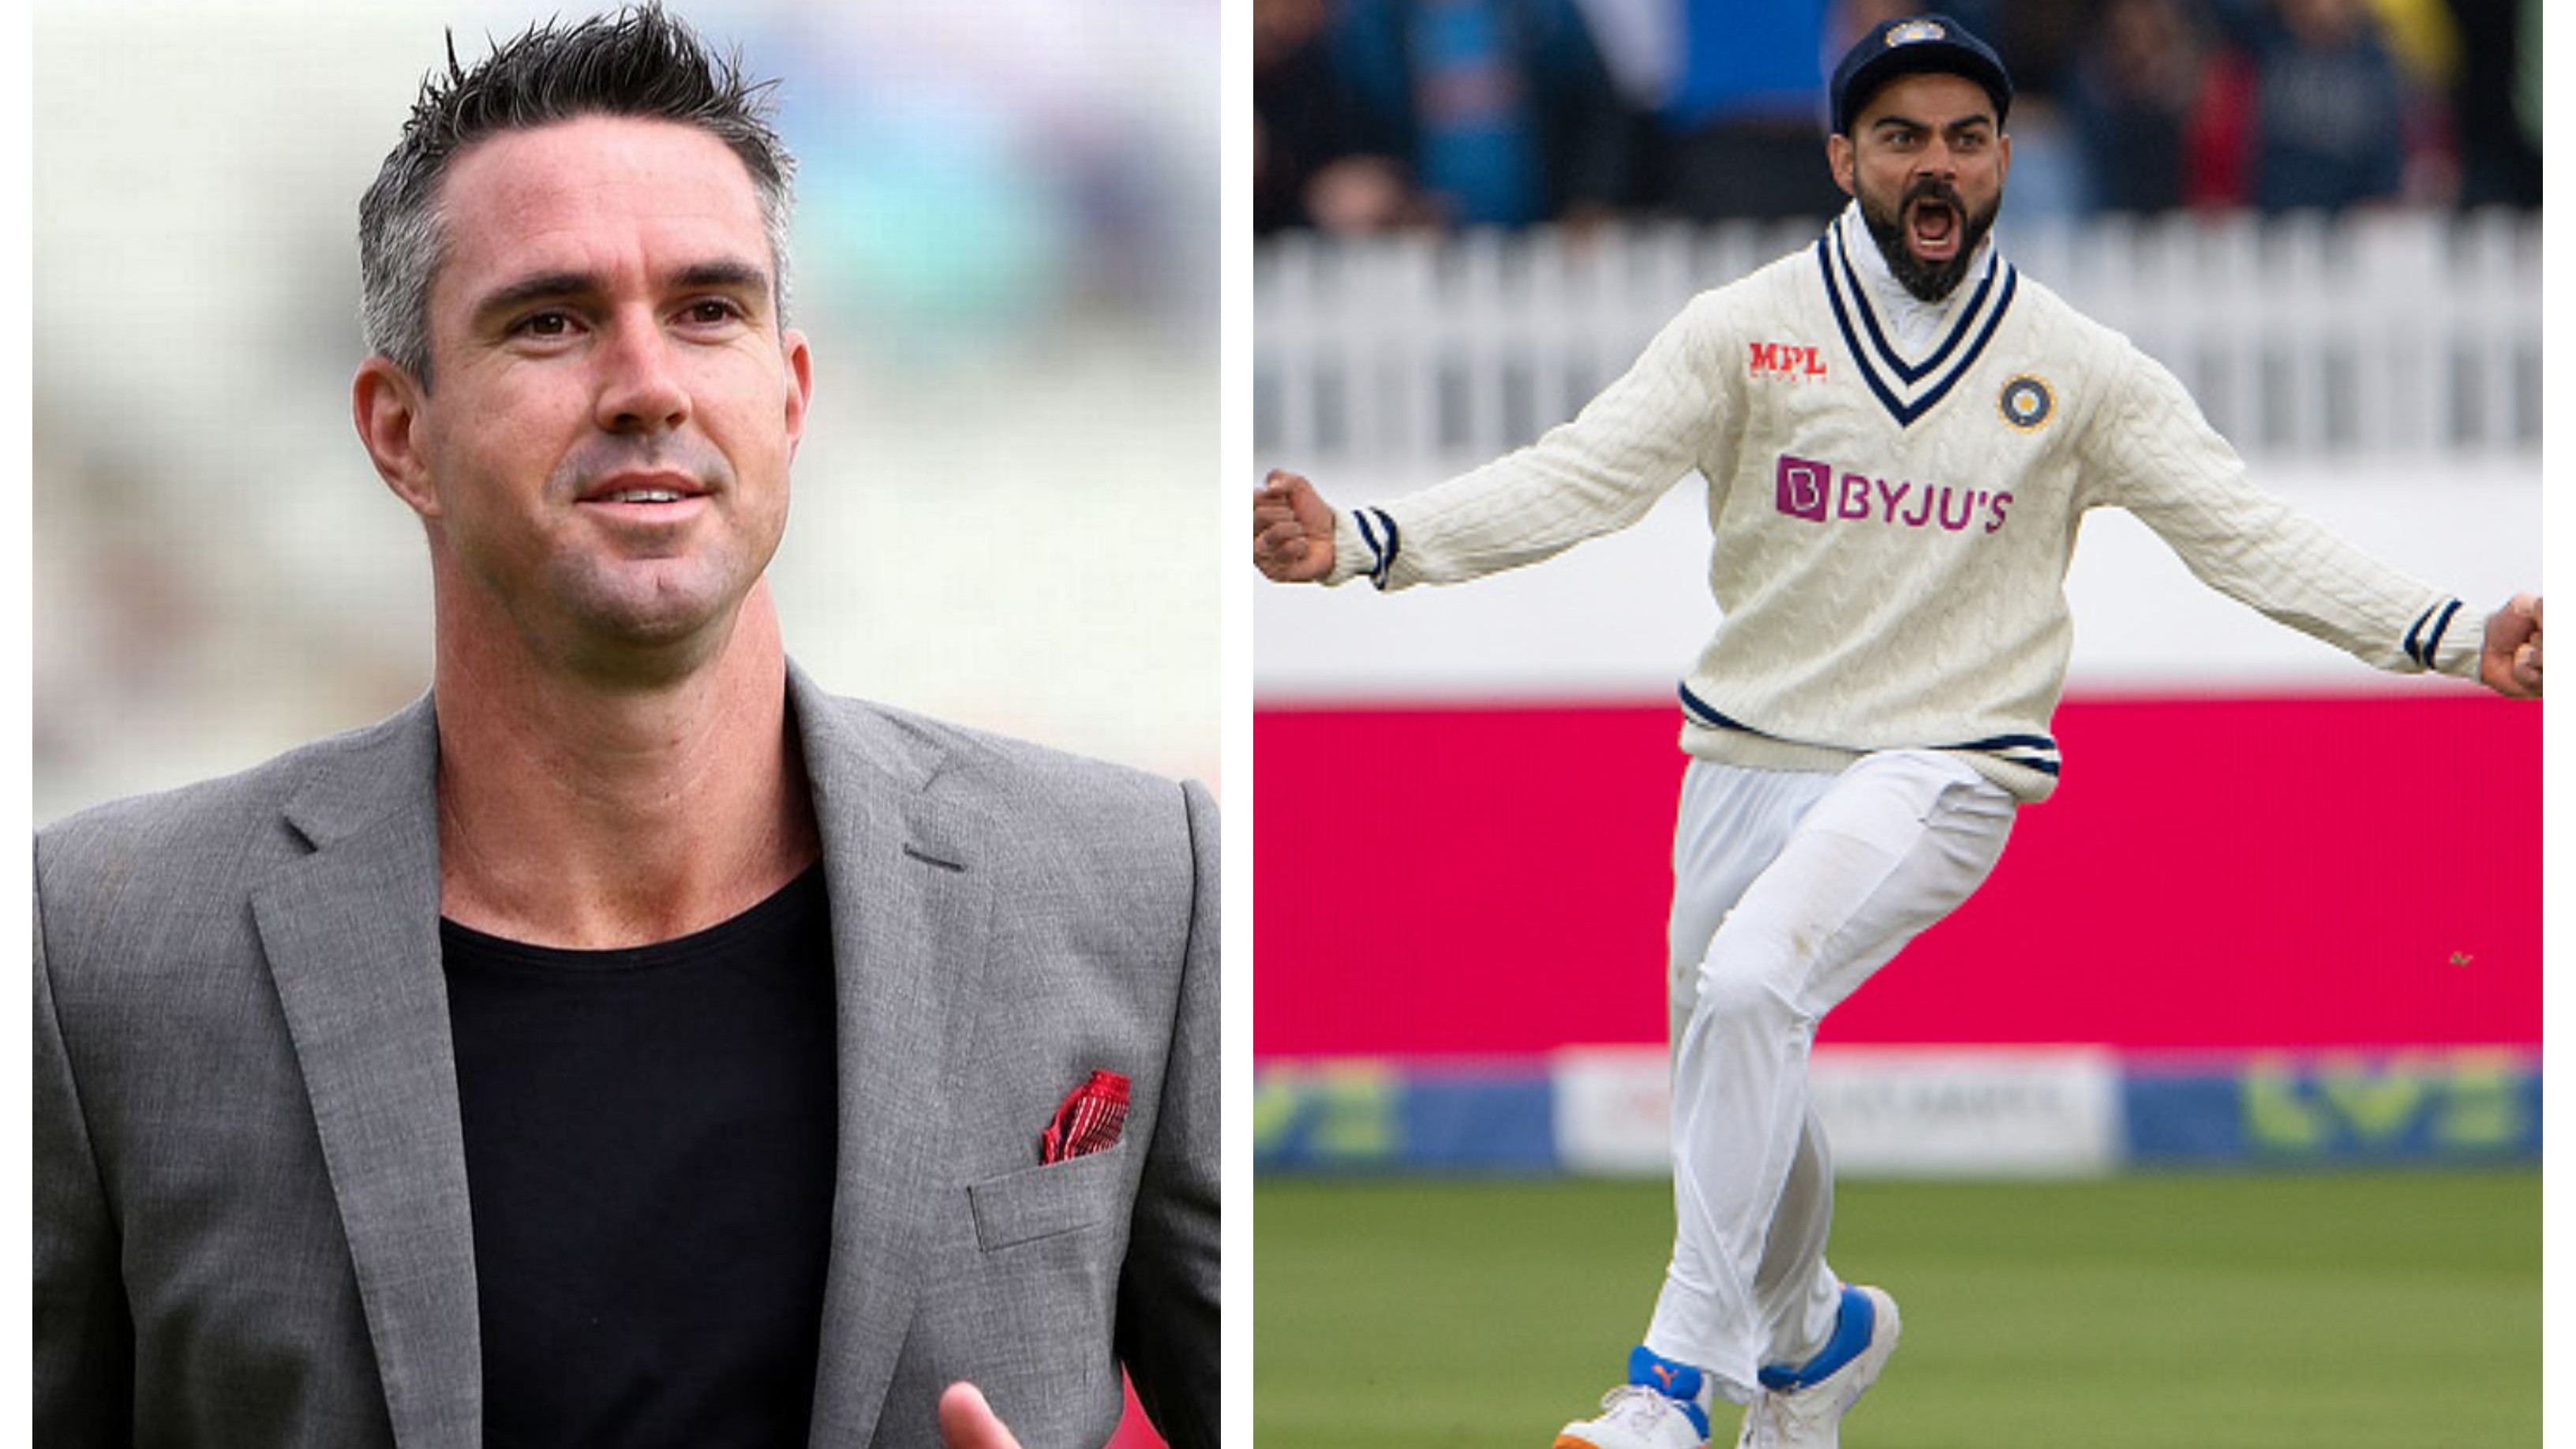 ENG v IND 2021: ‘Good to see a global superstar passionate about it’, Pietersen hails Kohli’s love for Test cricket